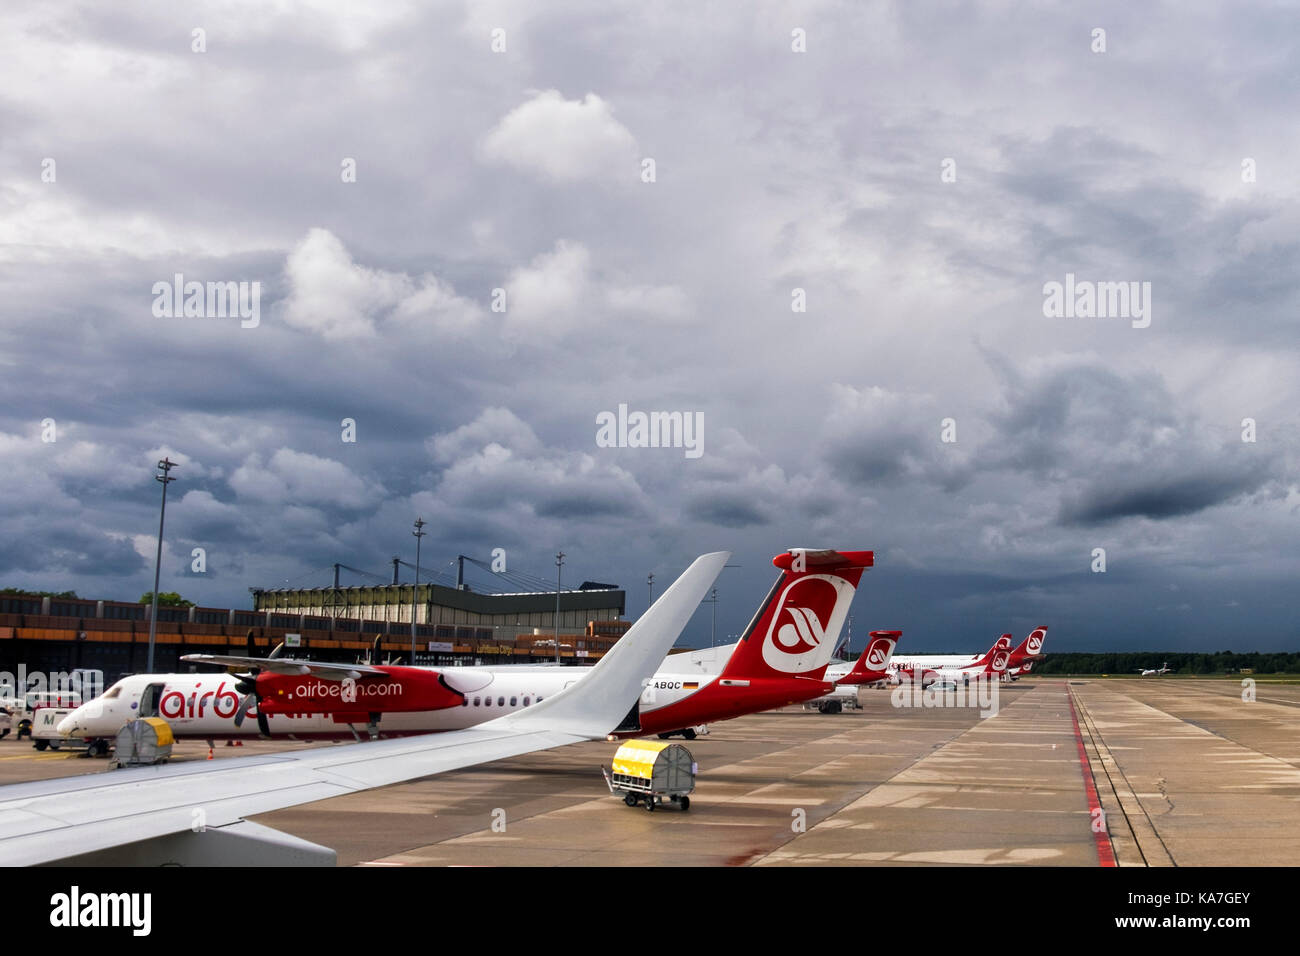 Berlin,Tegel Airport. Air Berlin planes on the ground. Airline facing uncertain future after financial problems, Stormy future, Black clouds overhead Stock Photo